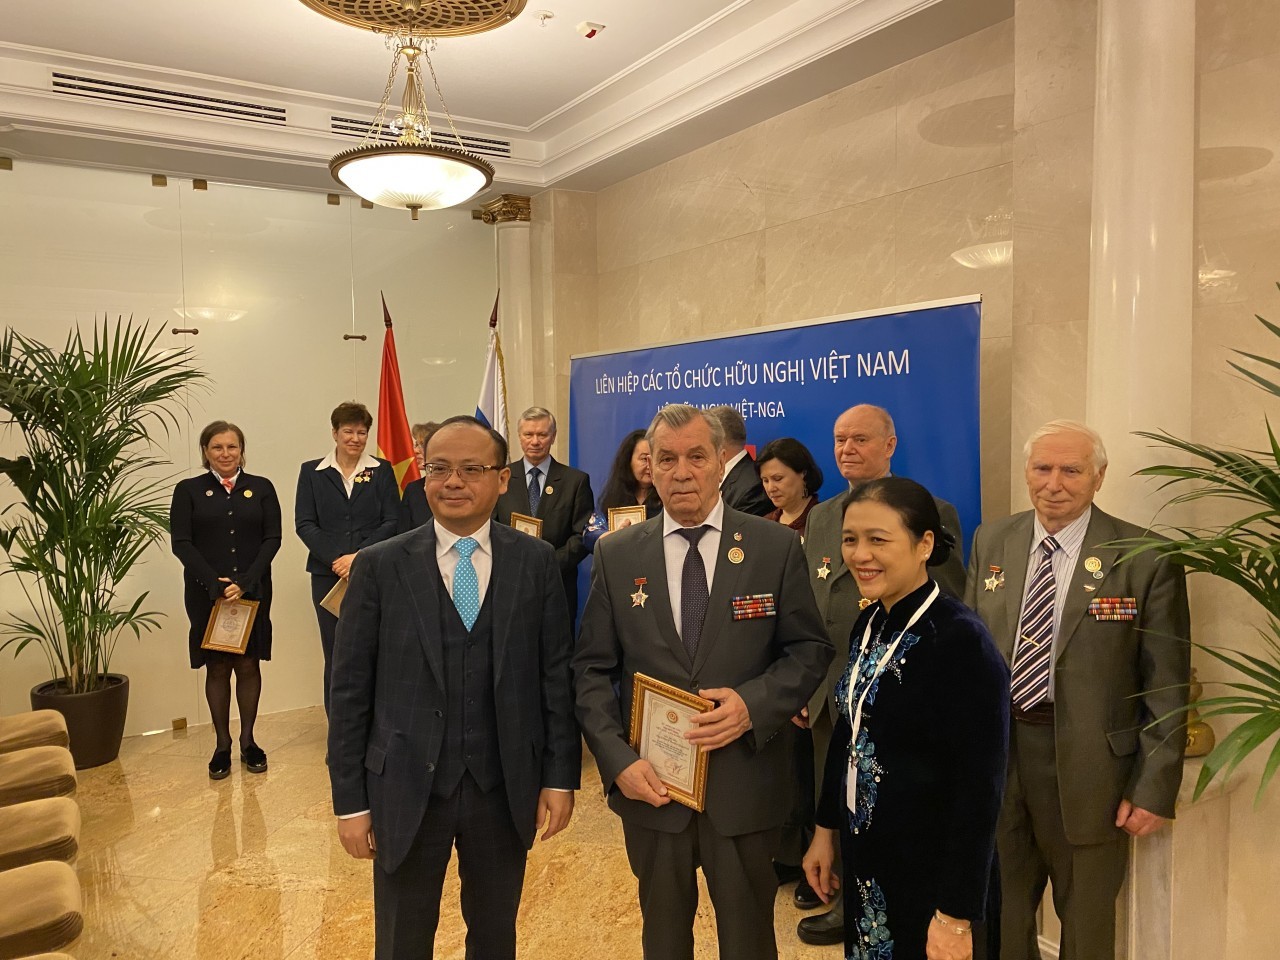 VUFO Cooperates with Many Organizations to Boost Vietnam - Russia Friendship Exchanges